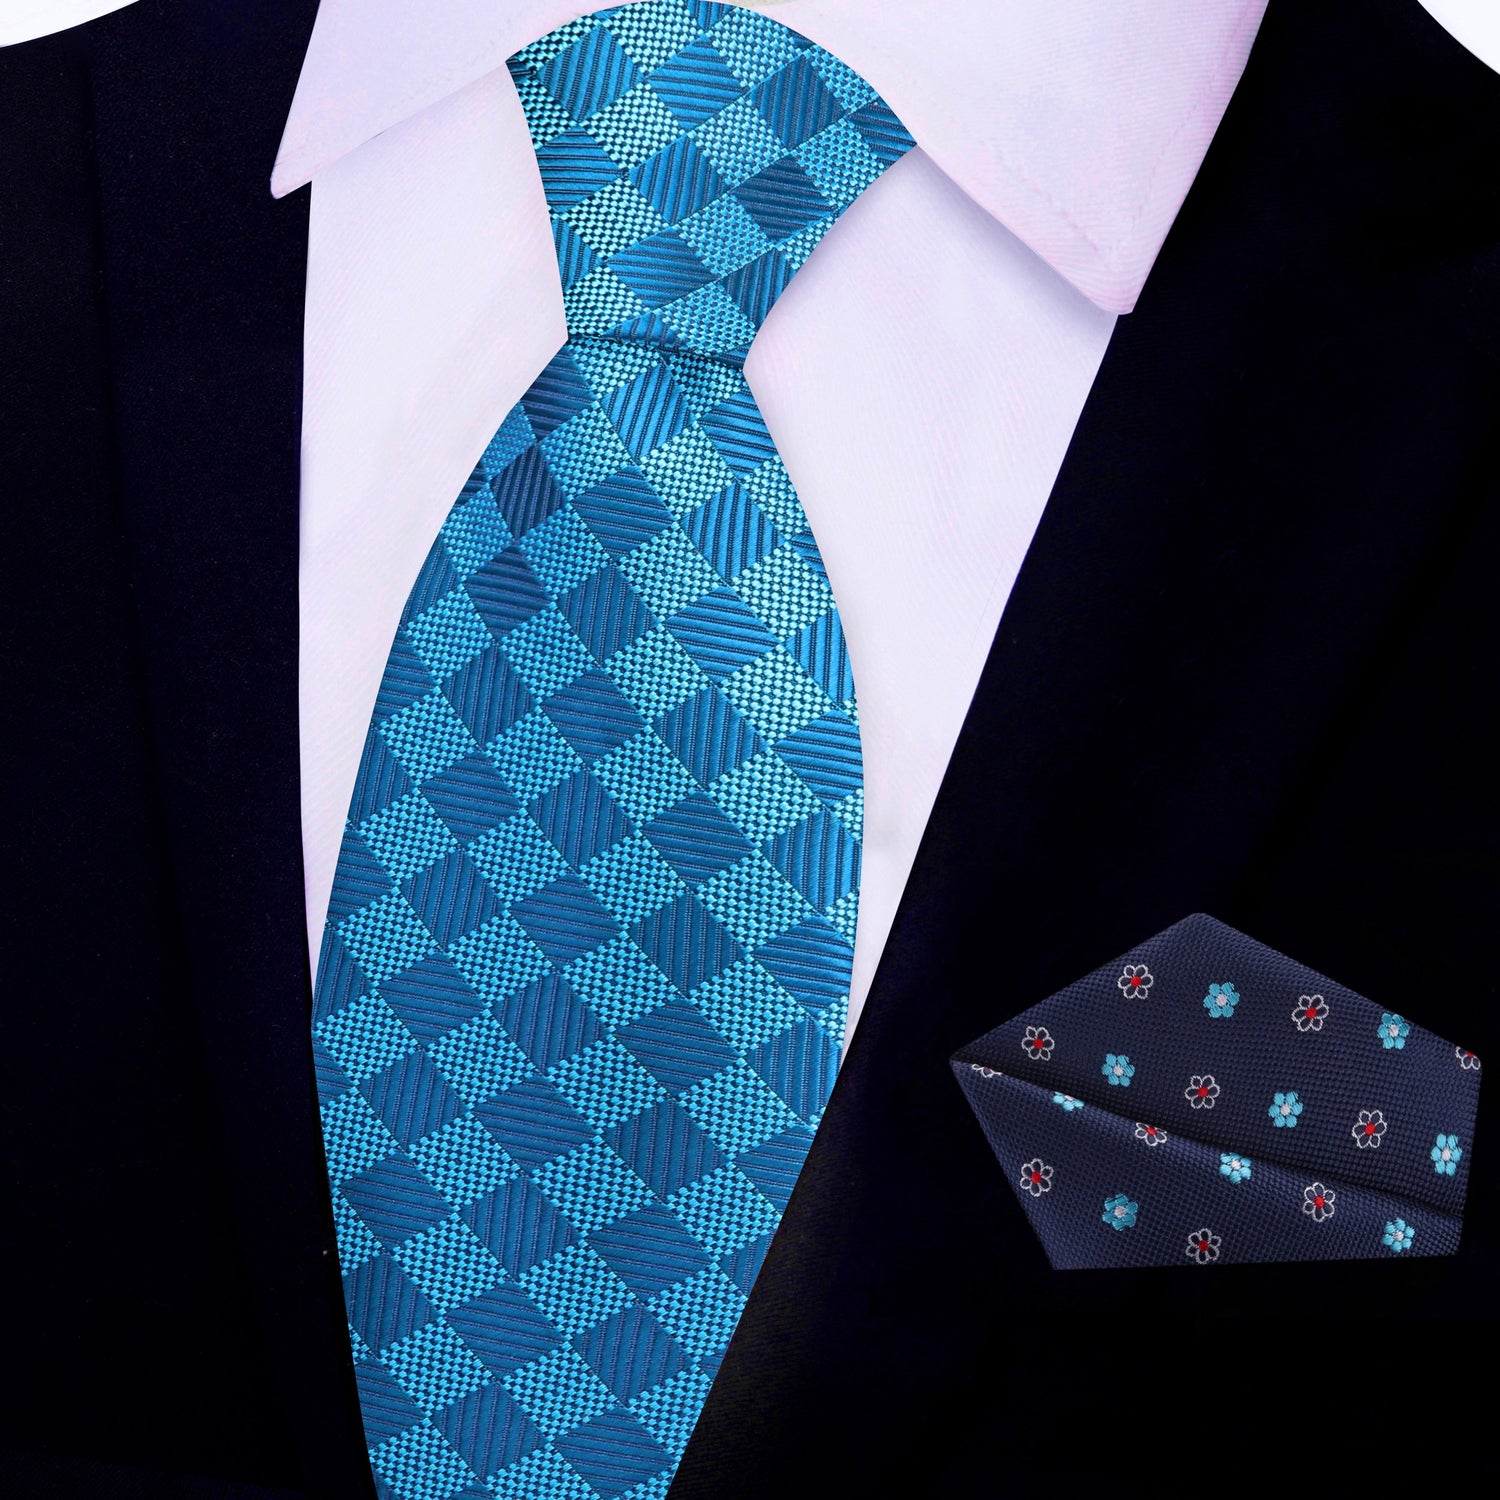 View 2: Rich Cyan Blue Geometric Diamonds Tie and Accenting Floral Square